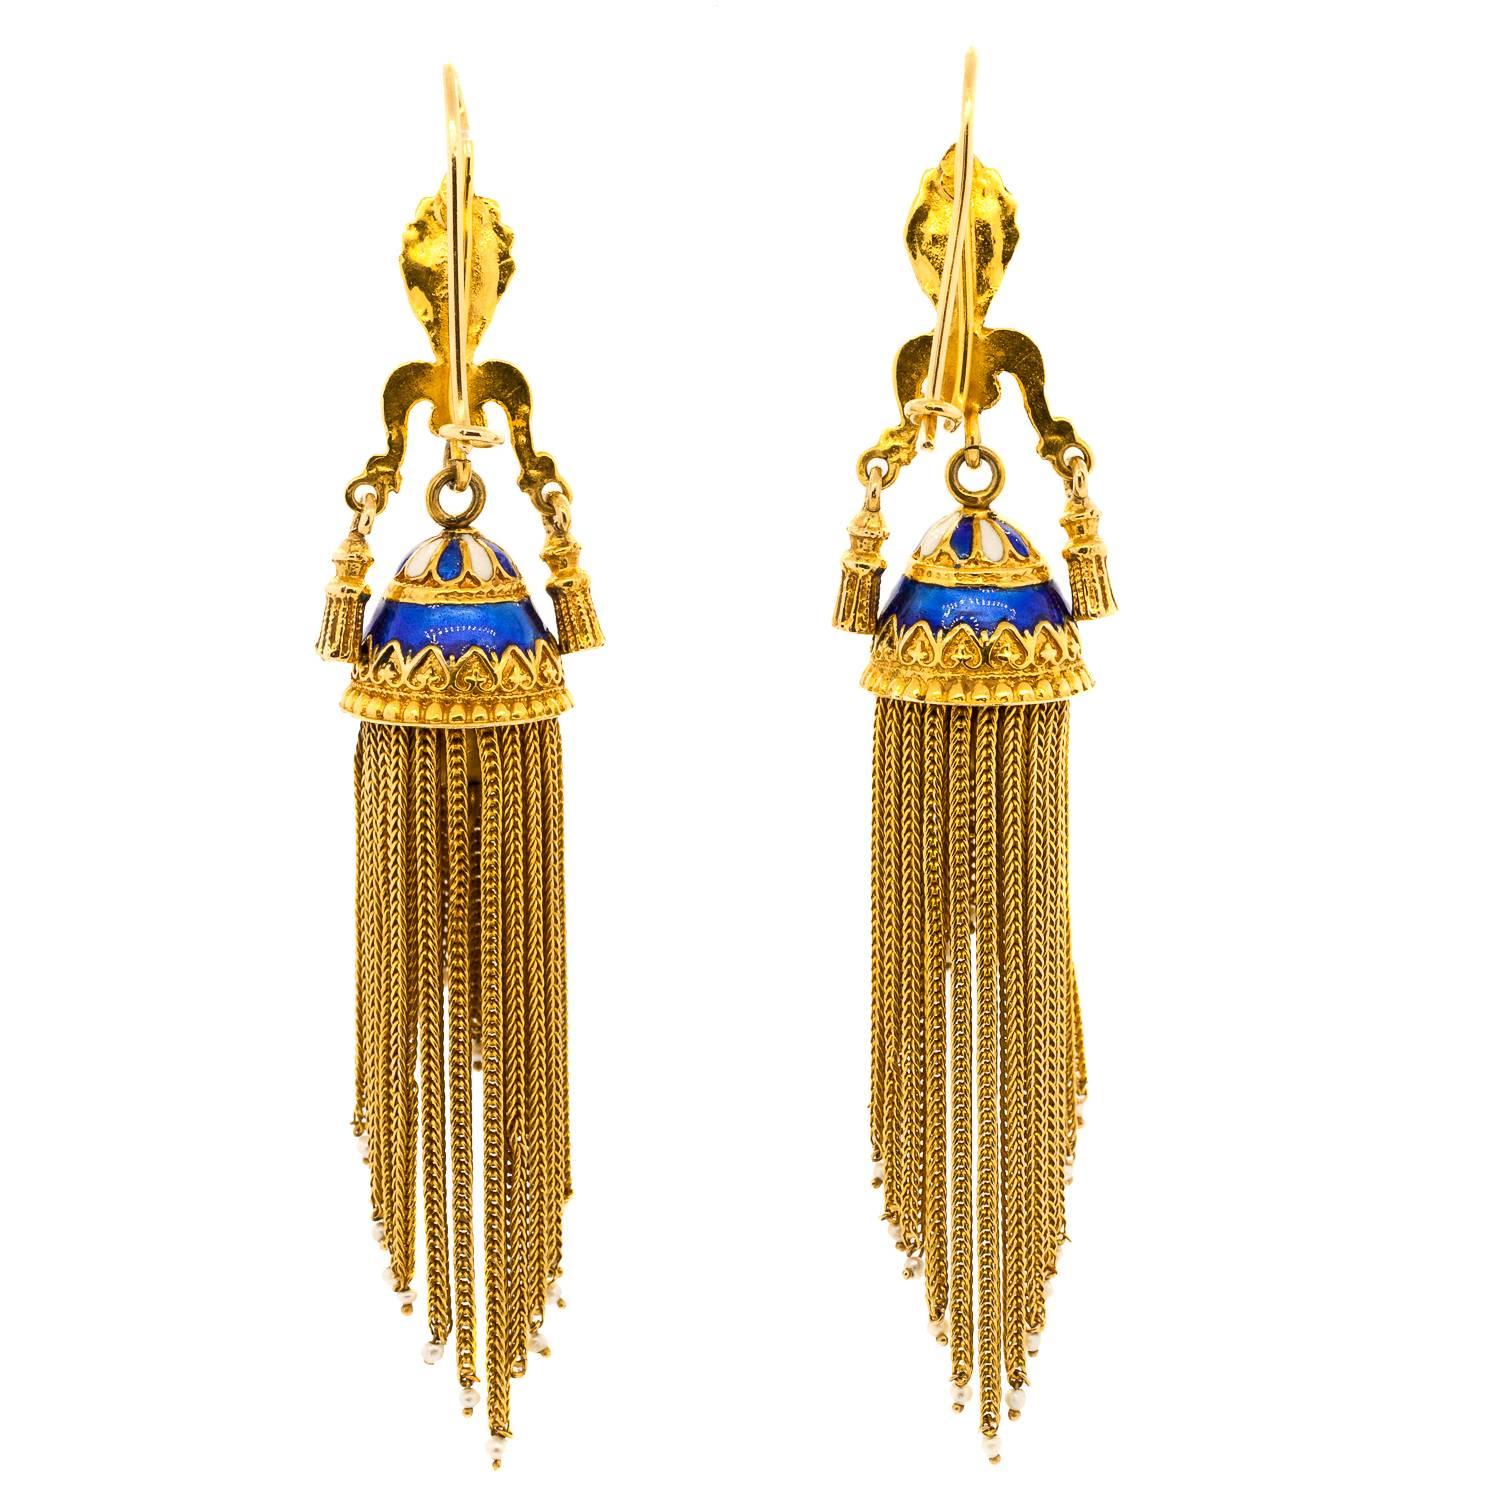 Delicately Victorian Revival earrings in 14KT yellow gold.  Graduating tassels dangle from a bell shape cup, small white Pearls accent the ends of the tassels. Blue enamel enhances the engraved bell cups.  The earrings will make you feel like a